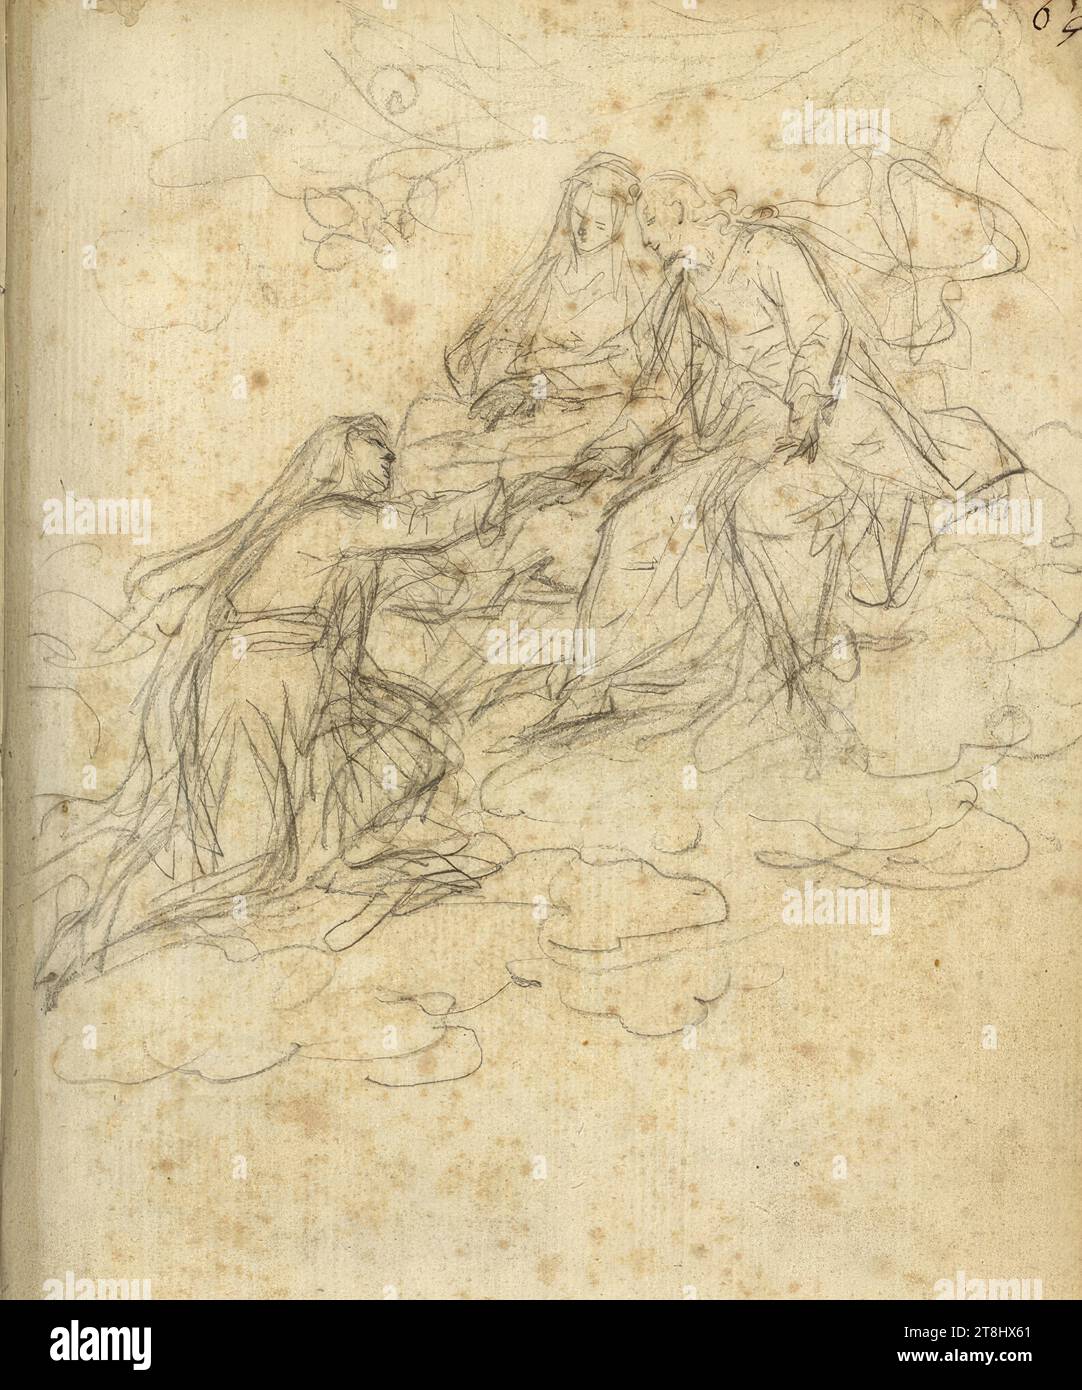 Recording of the Holy Clare in the sky, sketchbook Altomonte Bartolomeo; 64 paginated pages, Bartolomeo Altomonte, Warsaw 1694 - 1783 St. Florian, around 1720, drawing, lead pencil, 19.5 x 14 cm, 7 11/16 x 5 1/2 in., feather, l.u. 'Franzescini Stock Photo